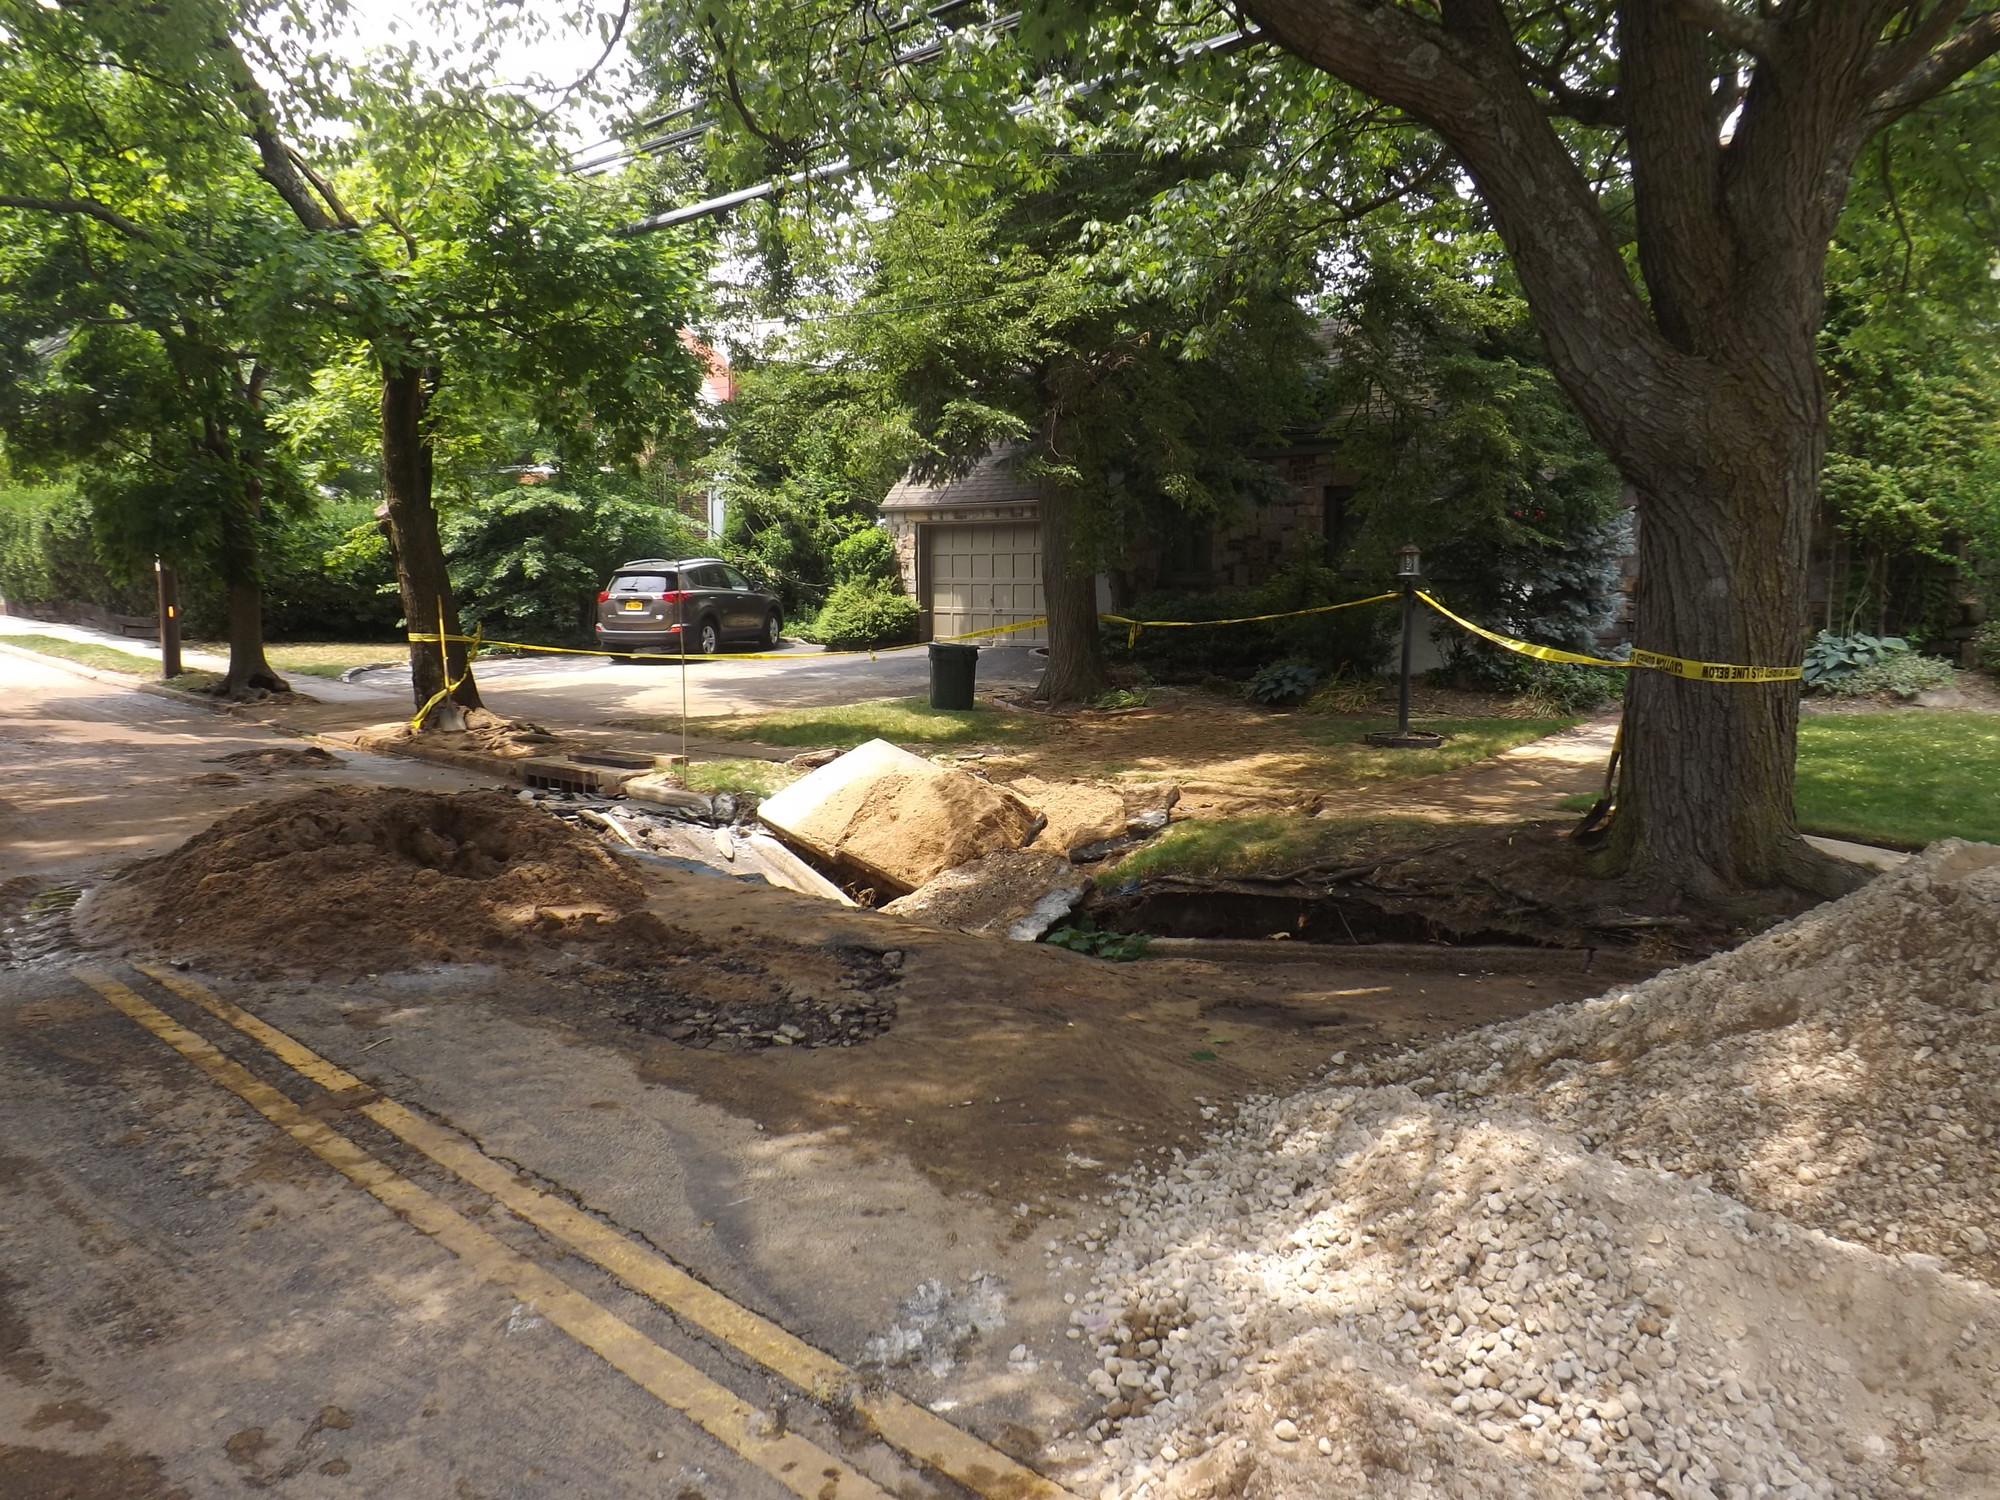 The section of Seaman Avenue from Herbert Street to Grand Avenue was closed while repairs were being made.